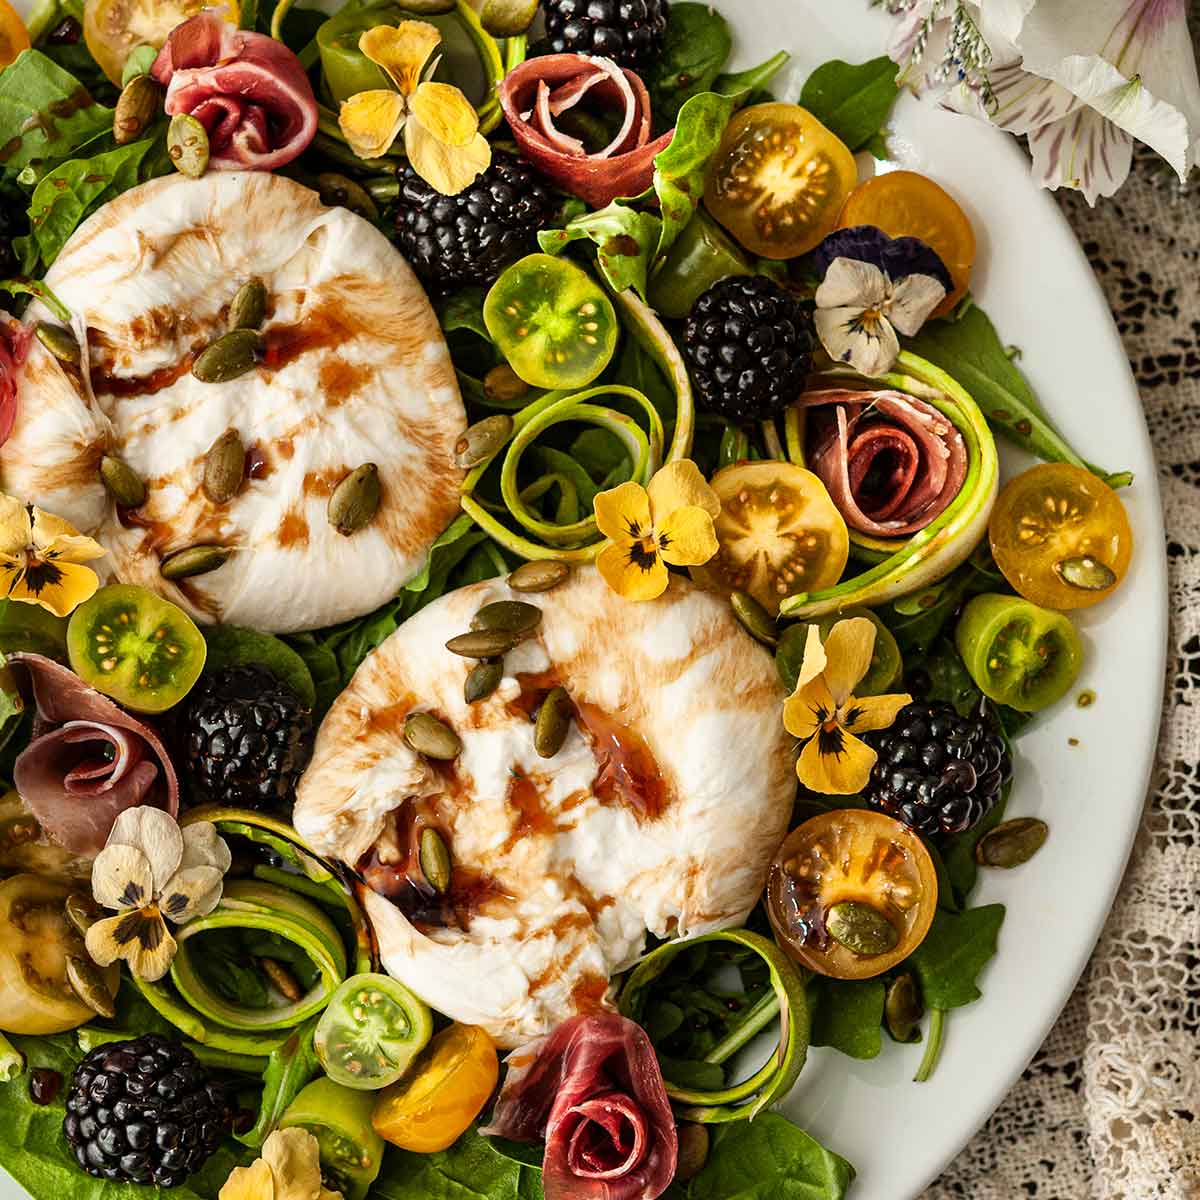 An ornate plate of burrata salad with flowers, tomatoes, blackberries and meat roses.